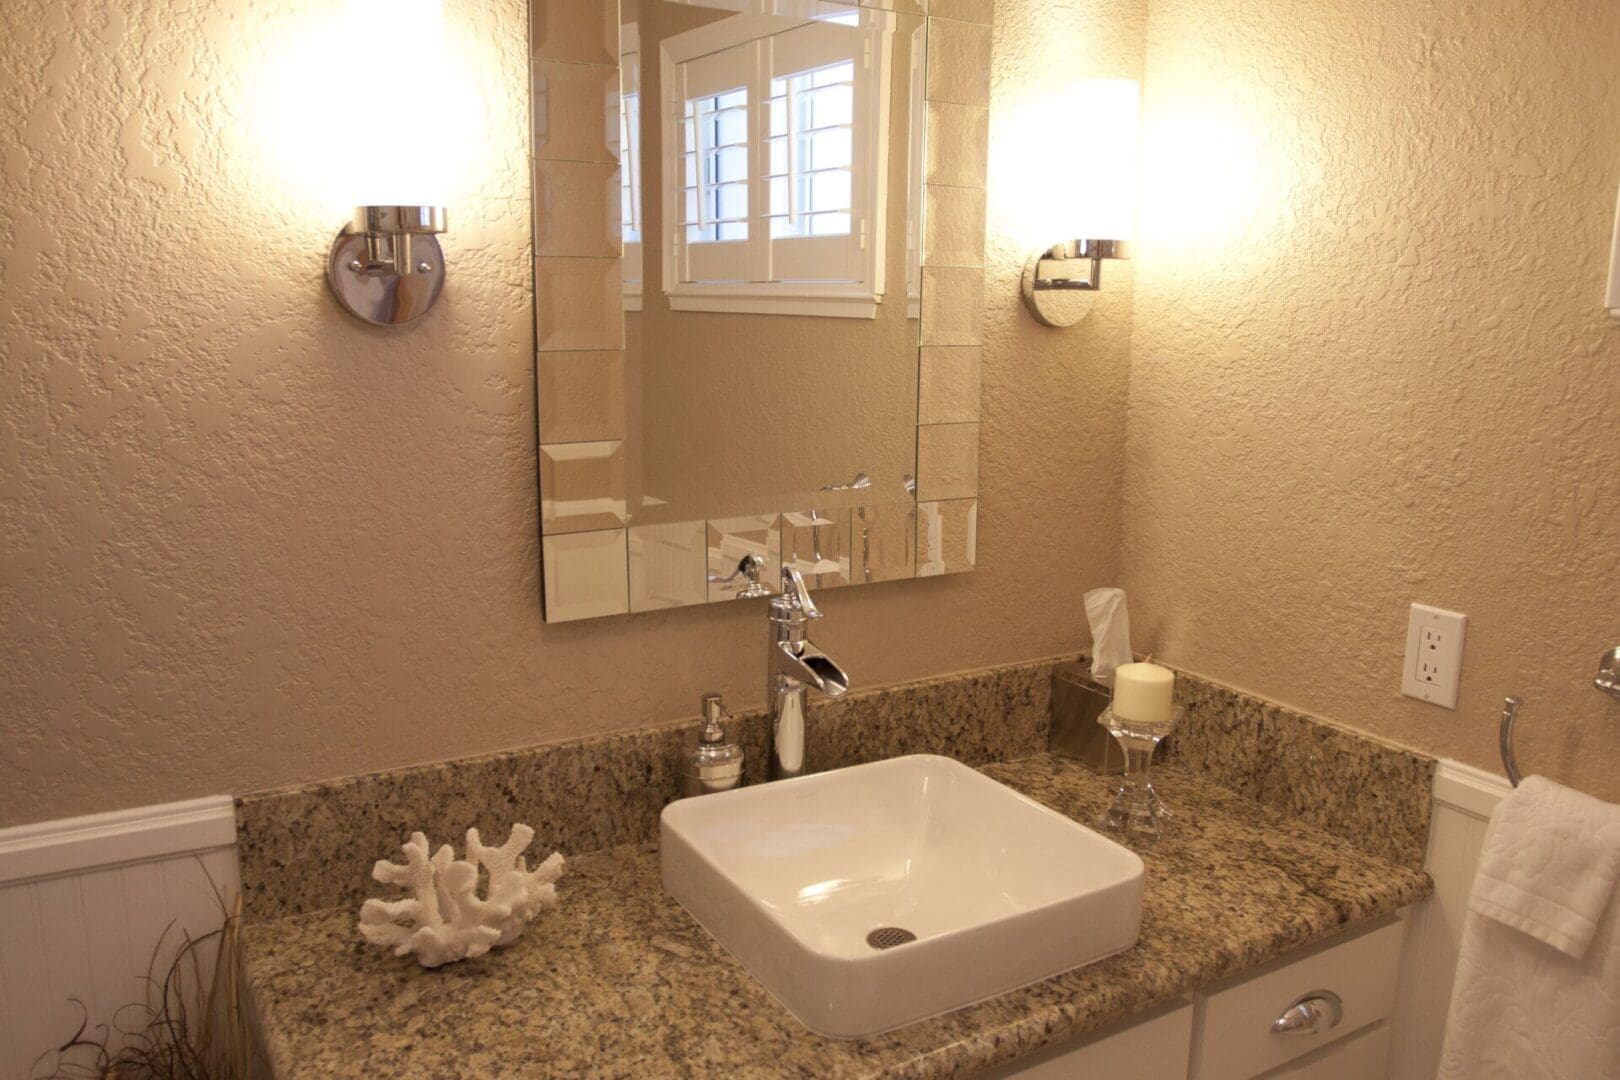 A bathroom with a sink, mirror and window.